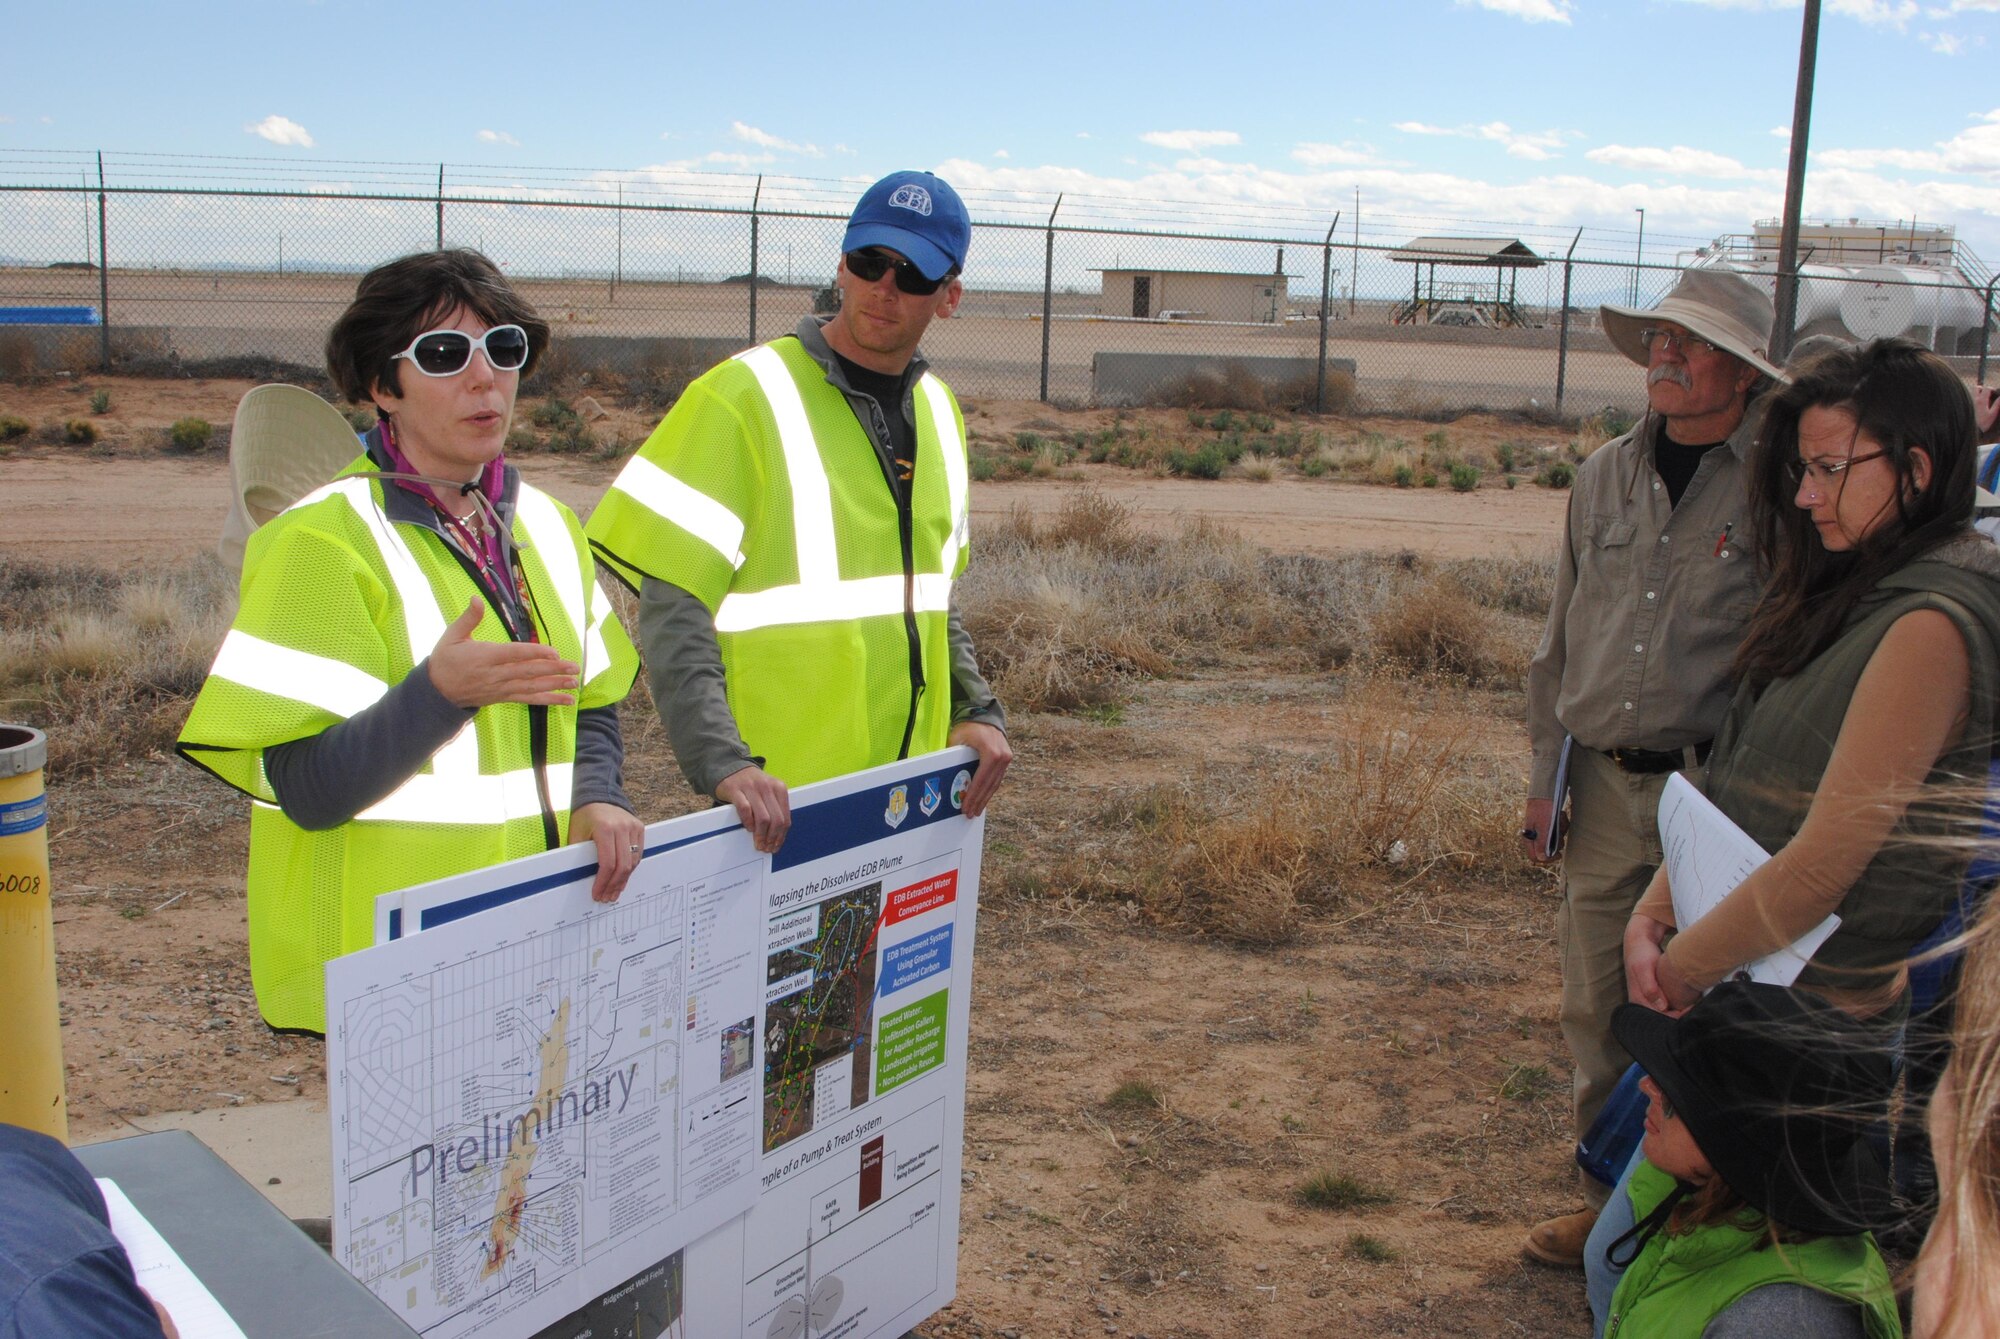 From left, project lead scientist Dr. Adria Bodour, a member of the Air Force Civil Engineer Center, and Jason Tarbert, with environmental contractor CB&I, discuss migration of the contamination plume and recent positive results from monitoring wells with members of the public April 18 near Kirtland's Bulk Fuels Facility. The discussion was part of a field trip to give members of the community an in-depth look at the science behind remediation efforts. (U.S. Air Force Photo/Jim Fisher/Released)